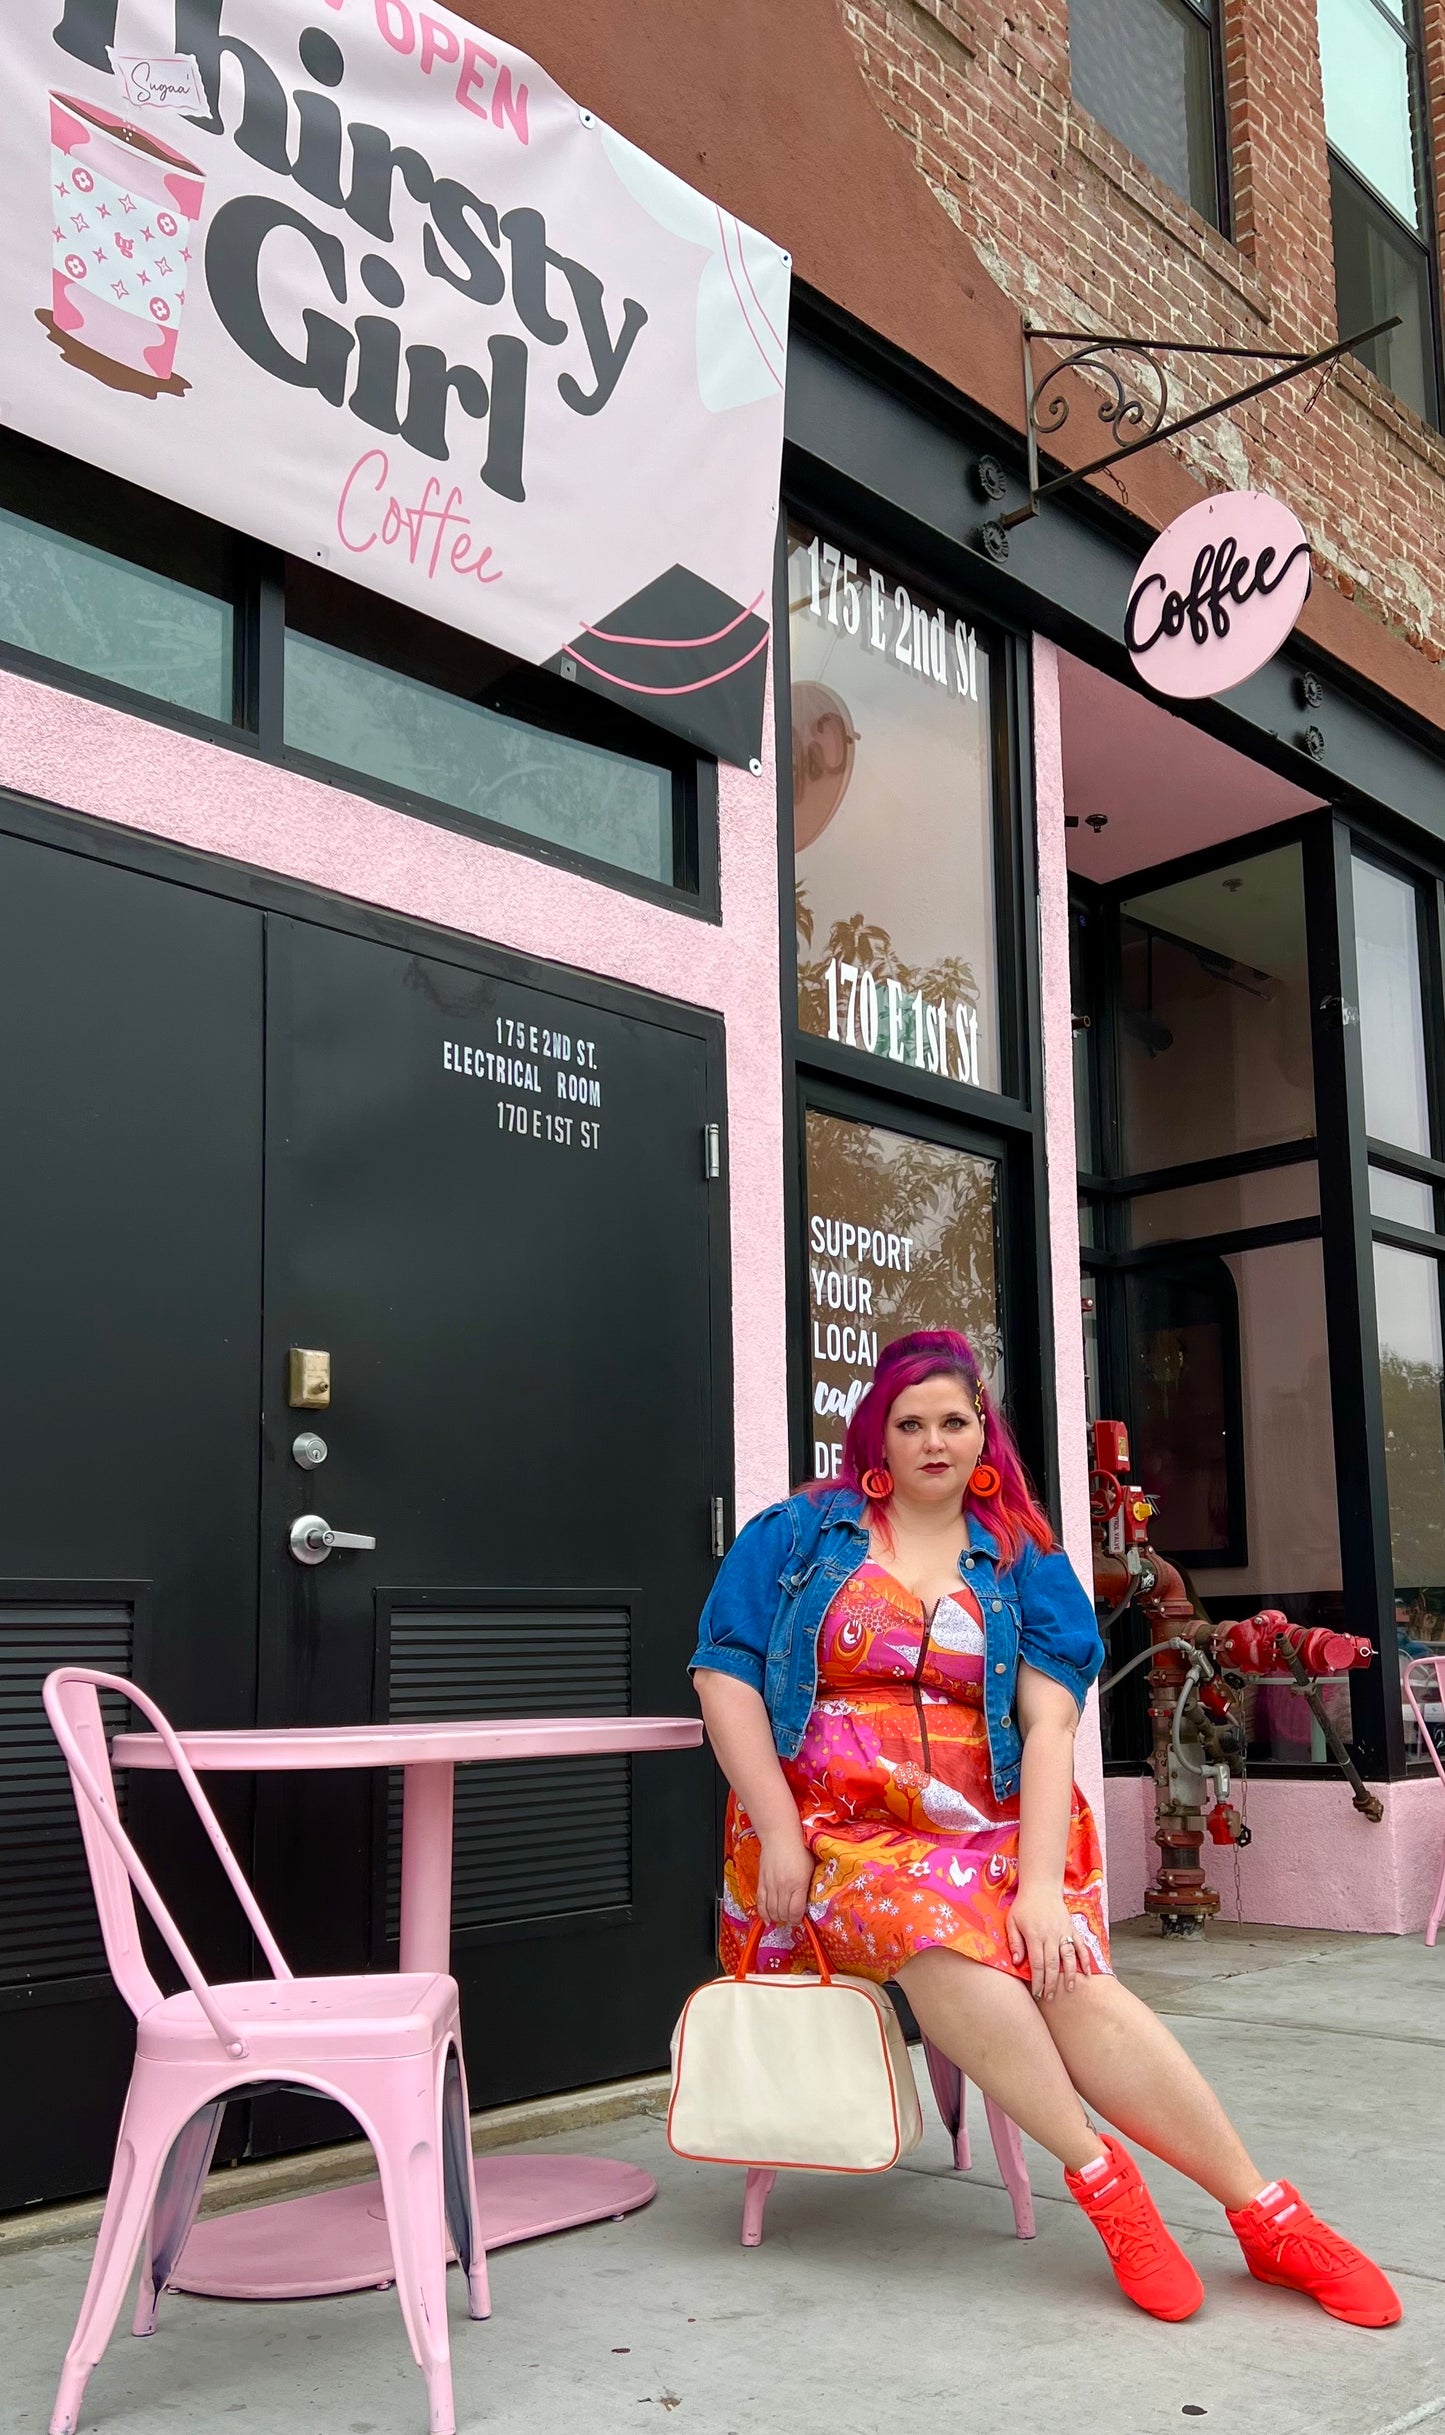 Pretty pink-haired model in bright red orange and pink dress with front zip, jean jacket and red shoes sitting outside a coffee shop